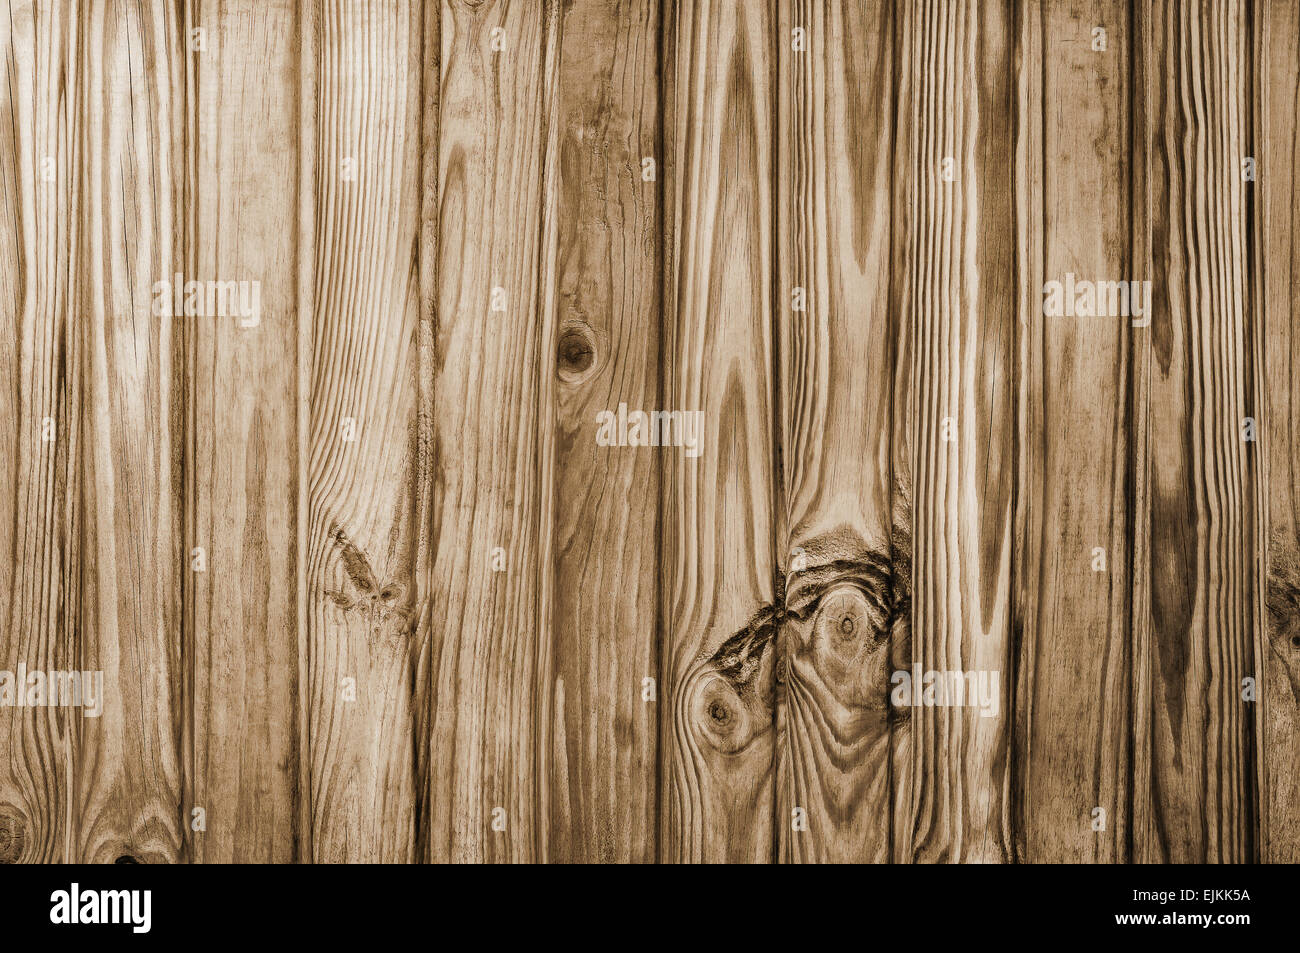 Unique Wooden Pine background or texture. Vertical lines brown Stock Photo